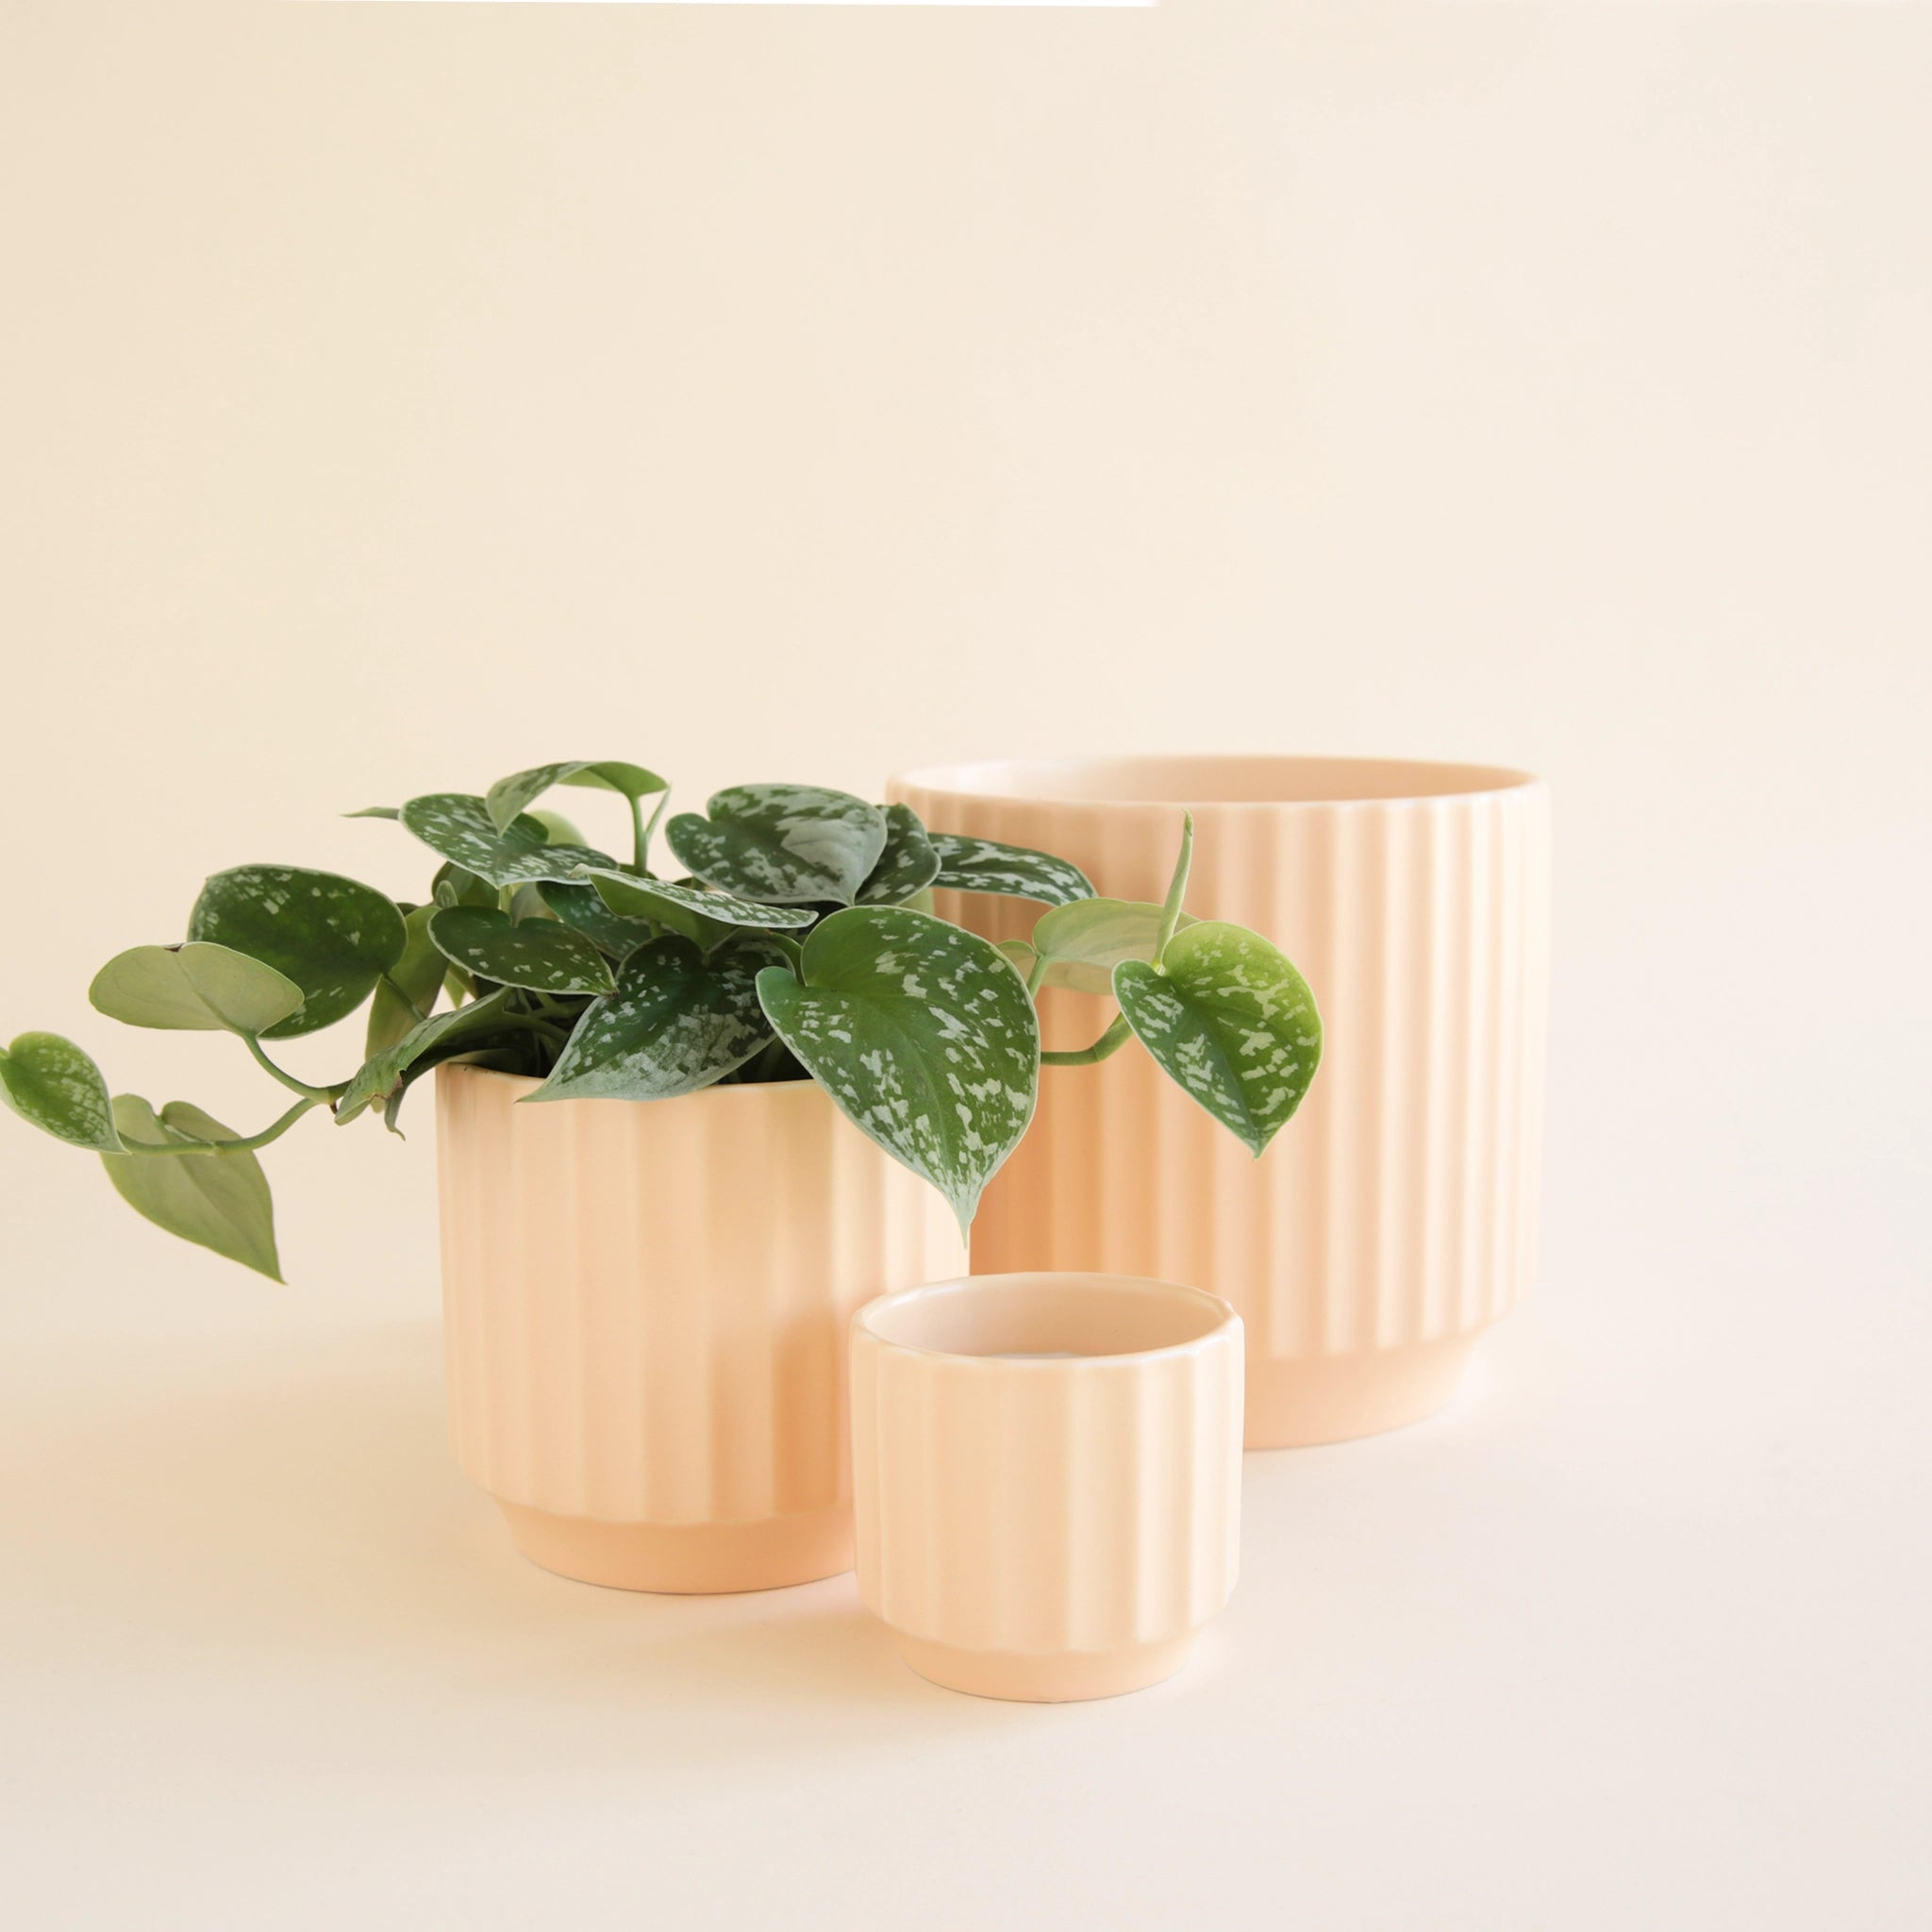 On a white background is three different sized ceramic pots with a fluted texture in a light pink shade. The medium pot is filled with a silver pictus plant.